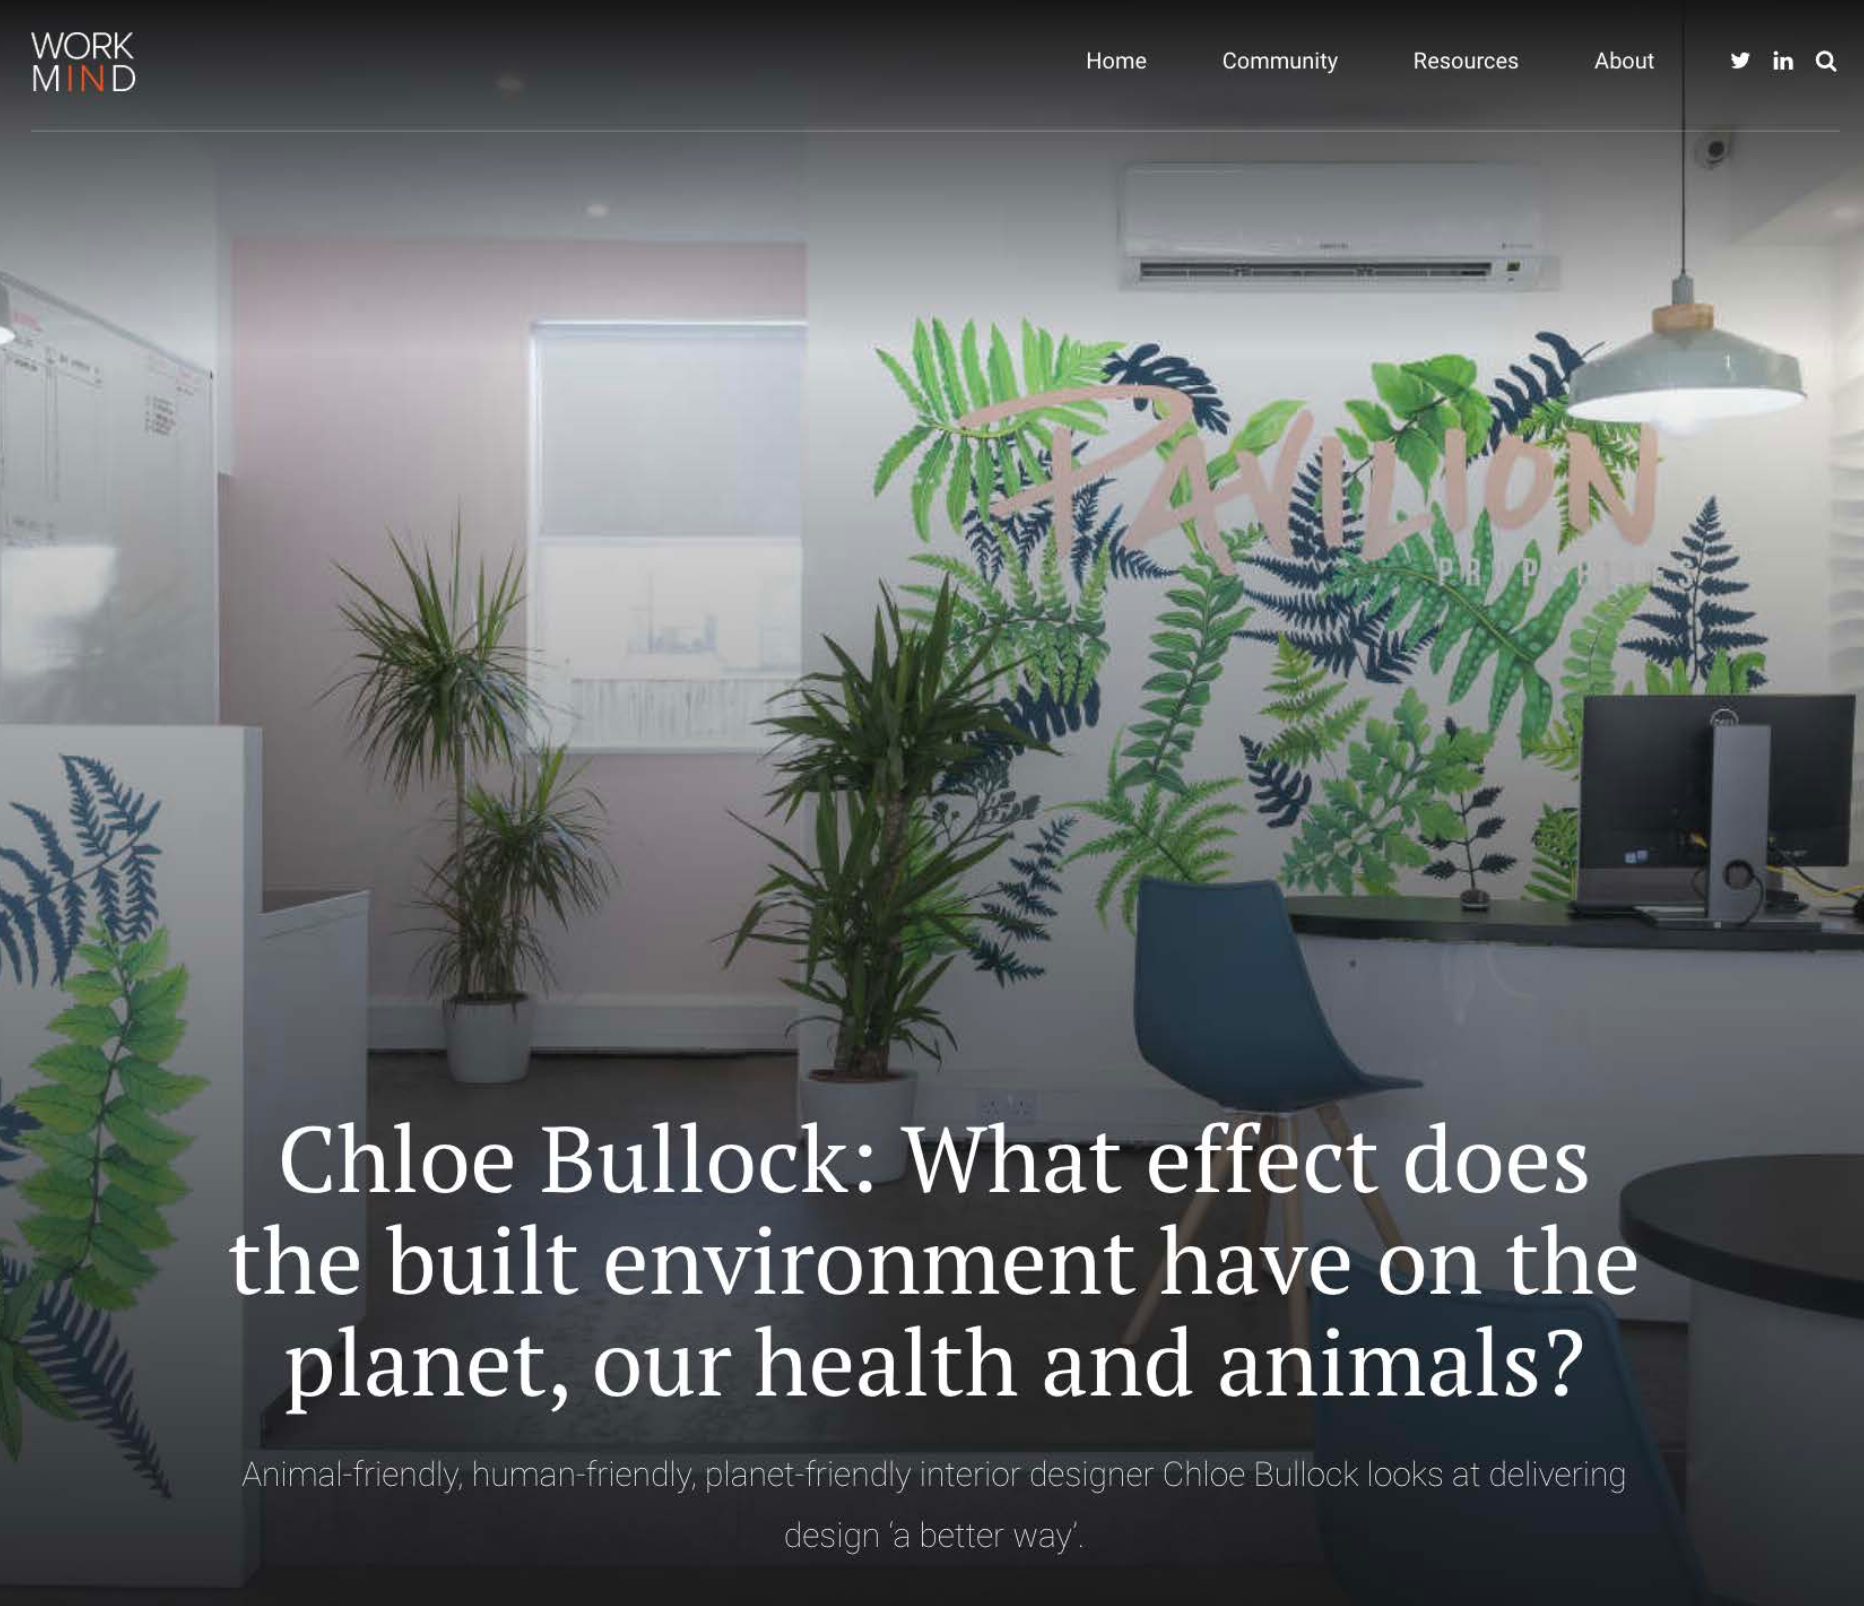 Work In Mind platform 'What effect does the built environment have on the planet, environment and animals?' - February 2020